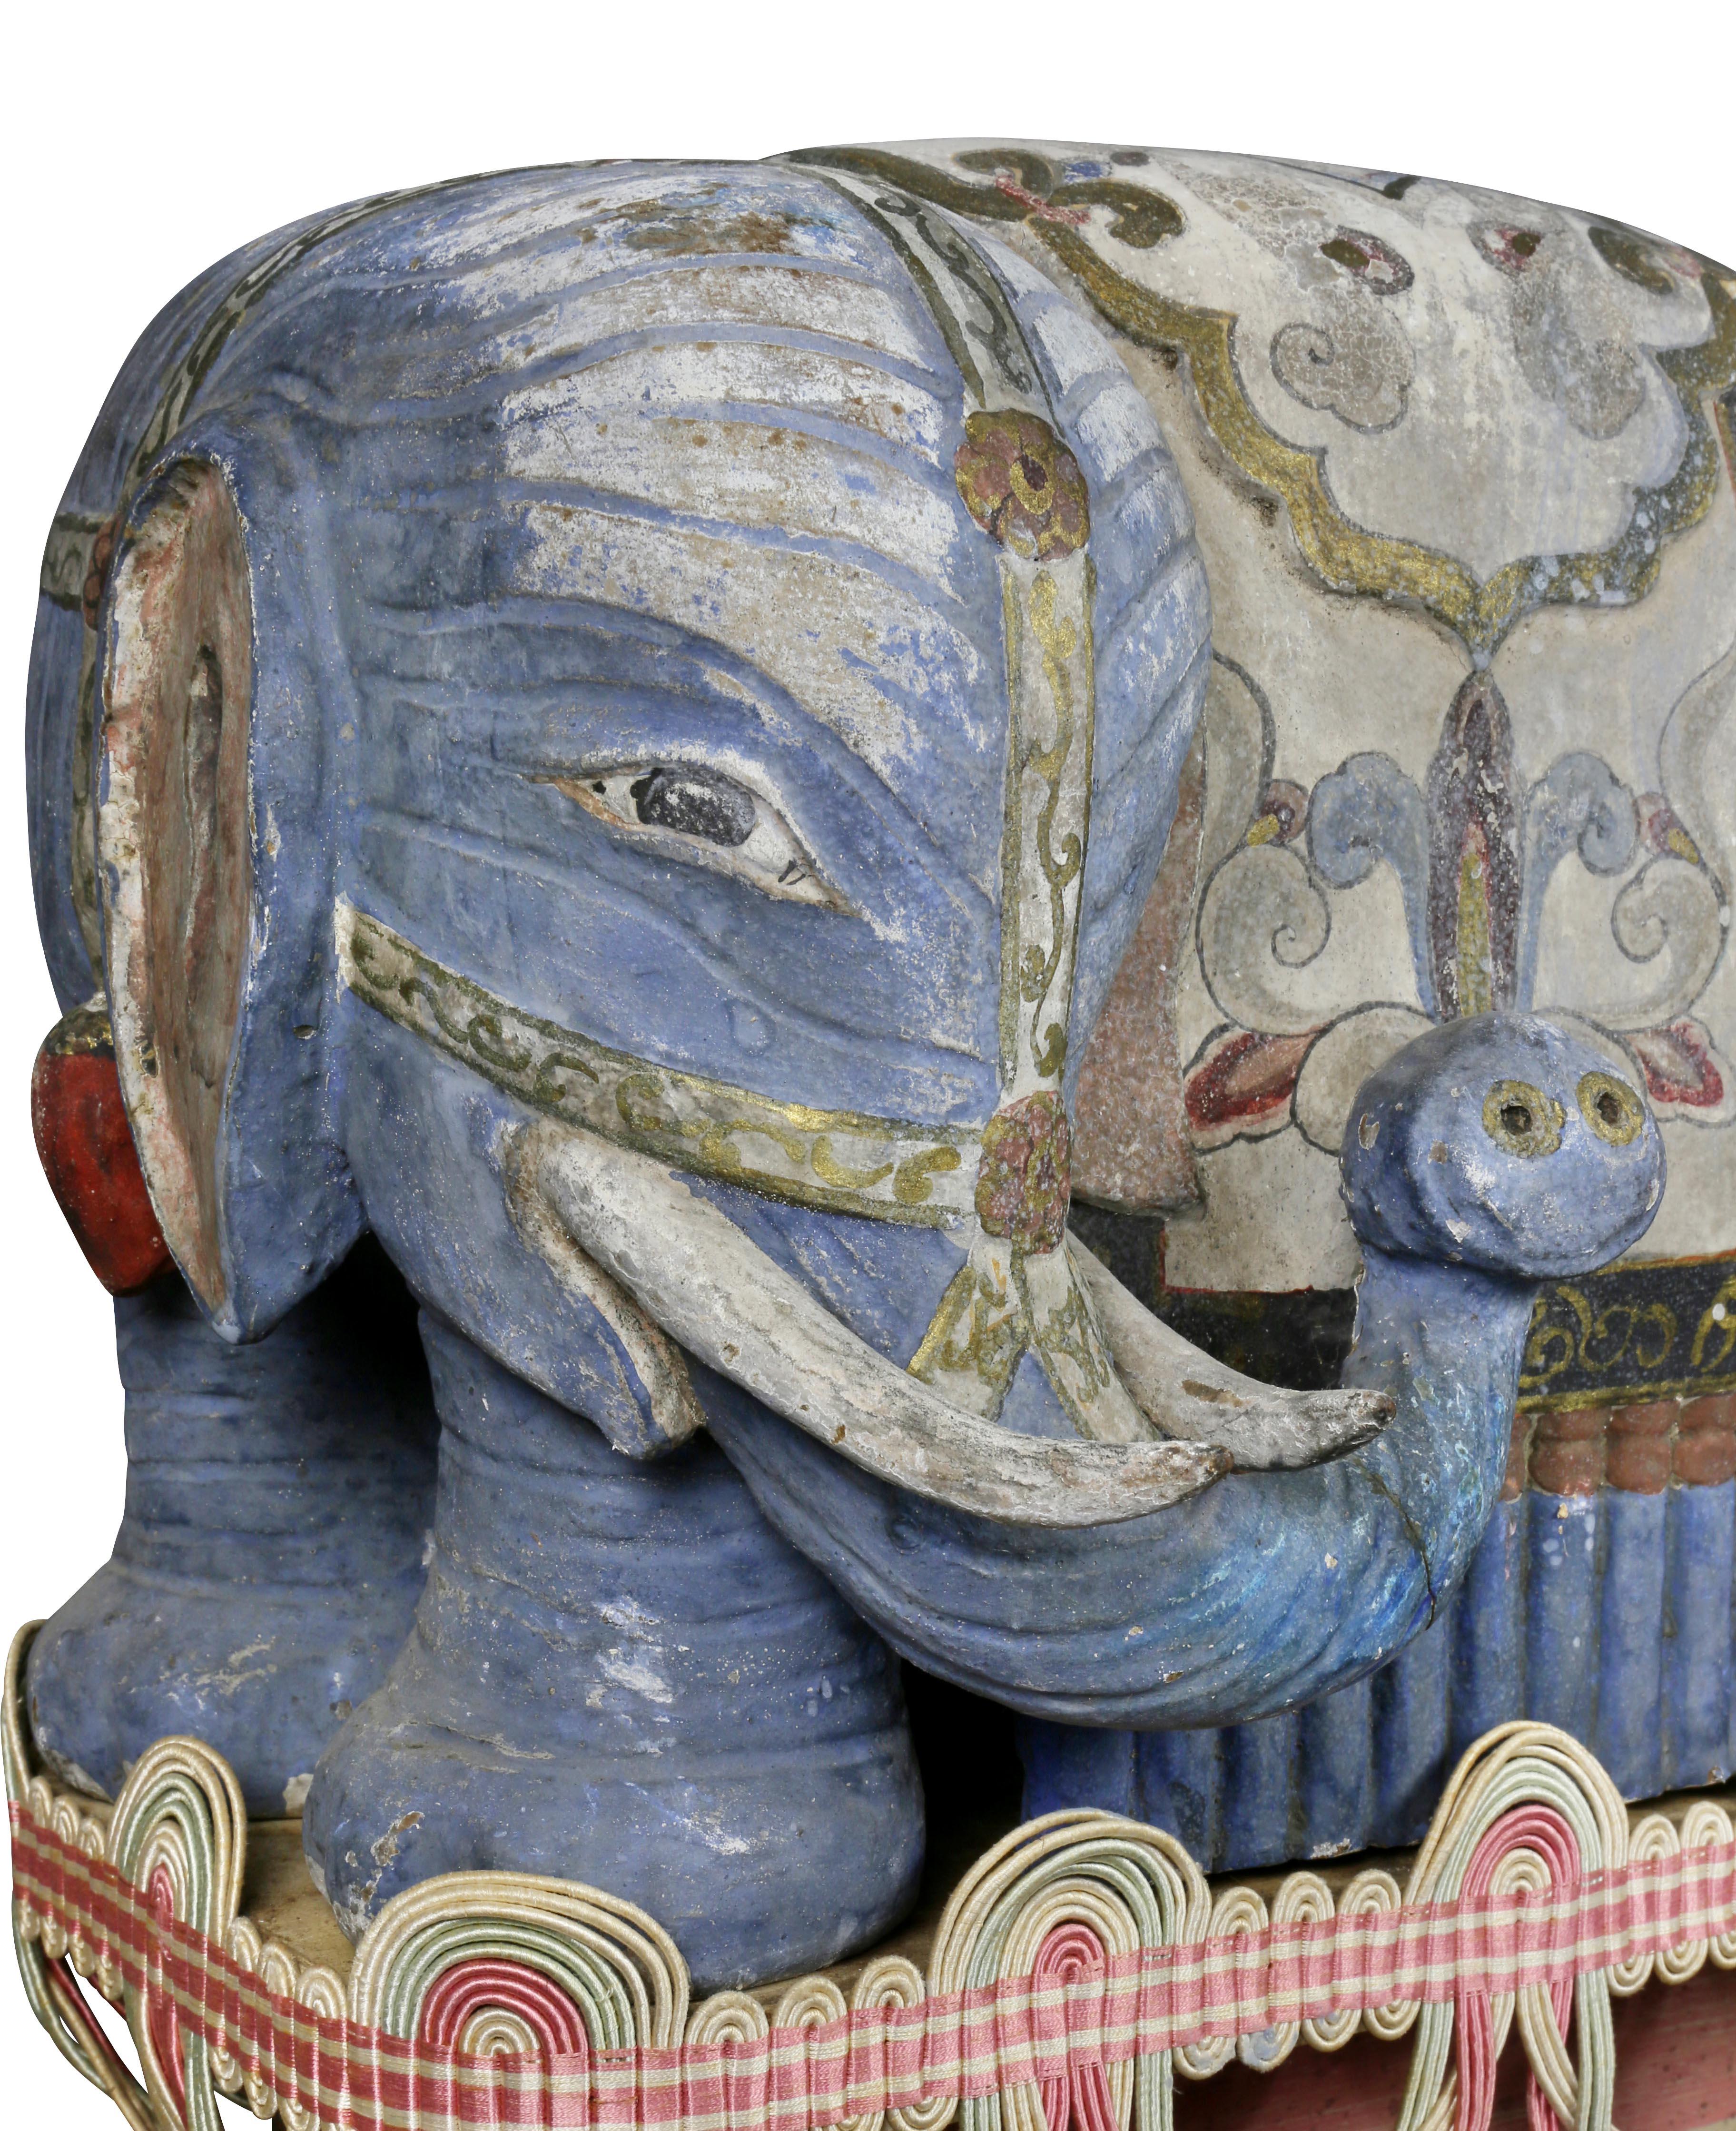 Pair of Chinese Painted Wood Elephants on Brackets (Asiatisch)